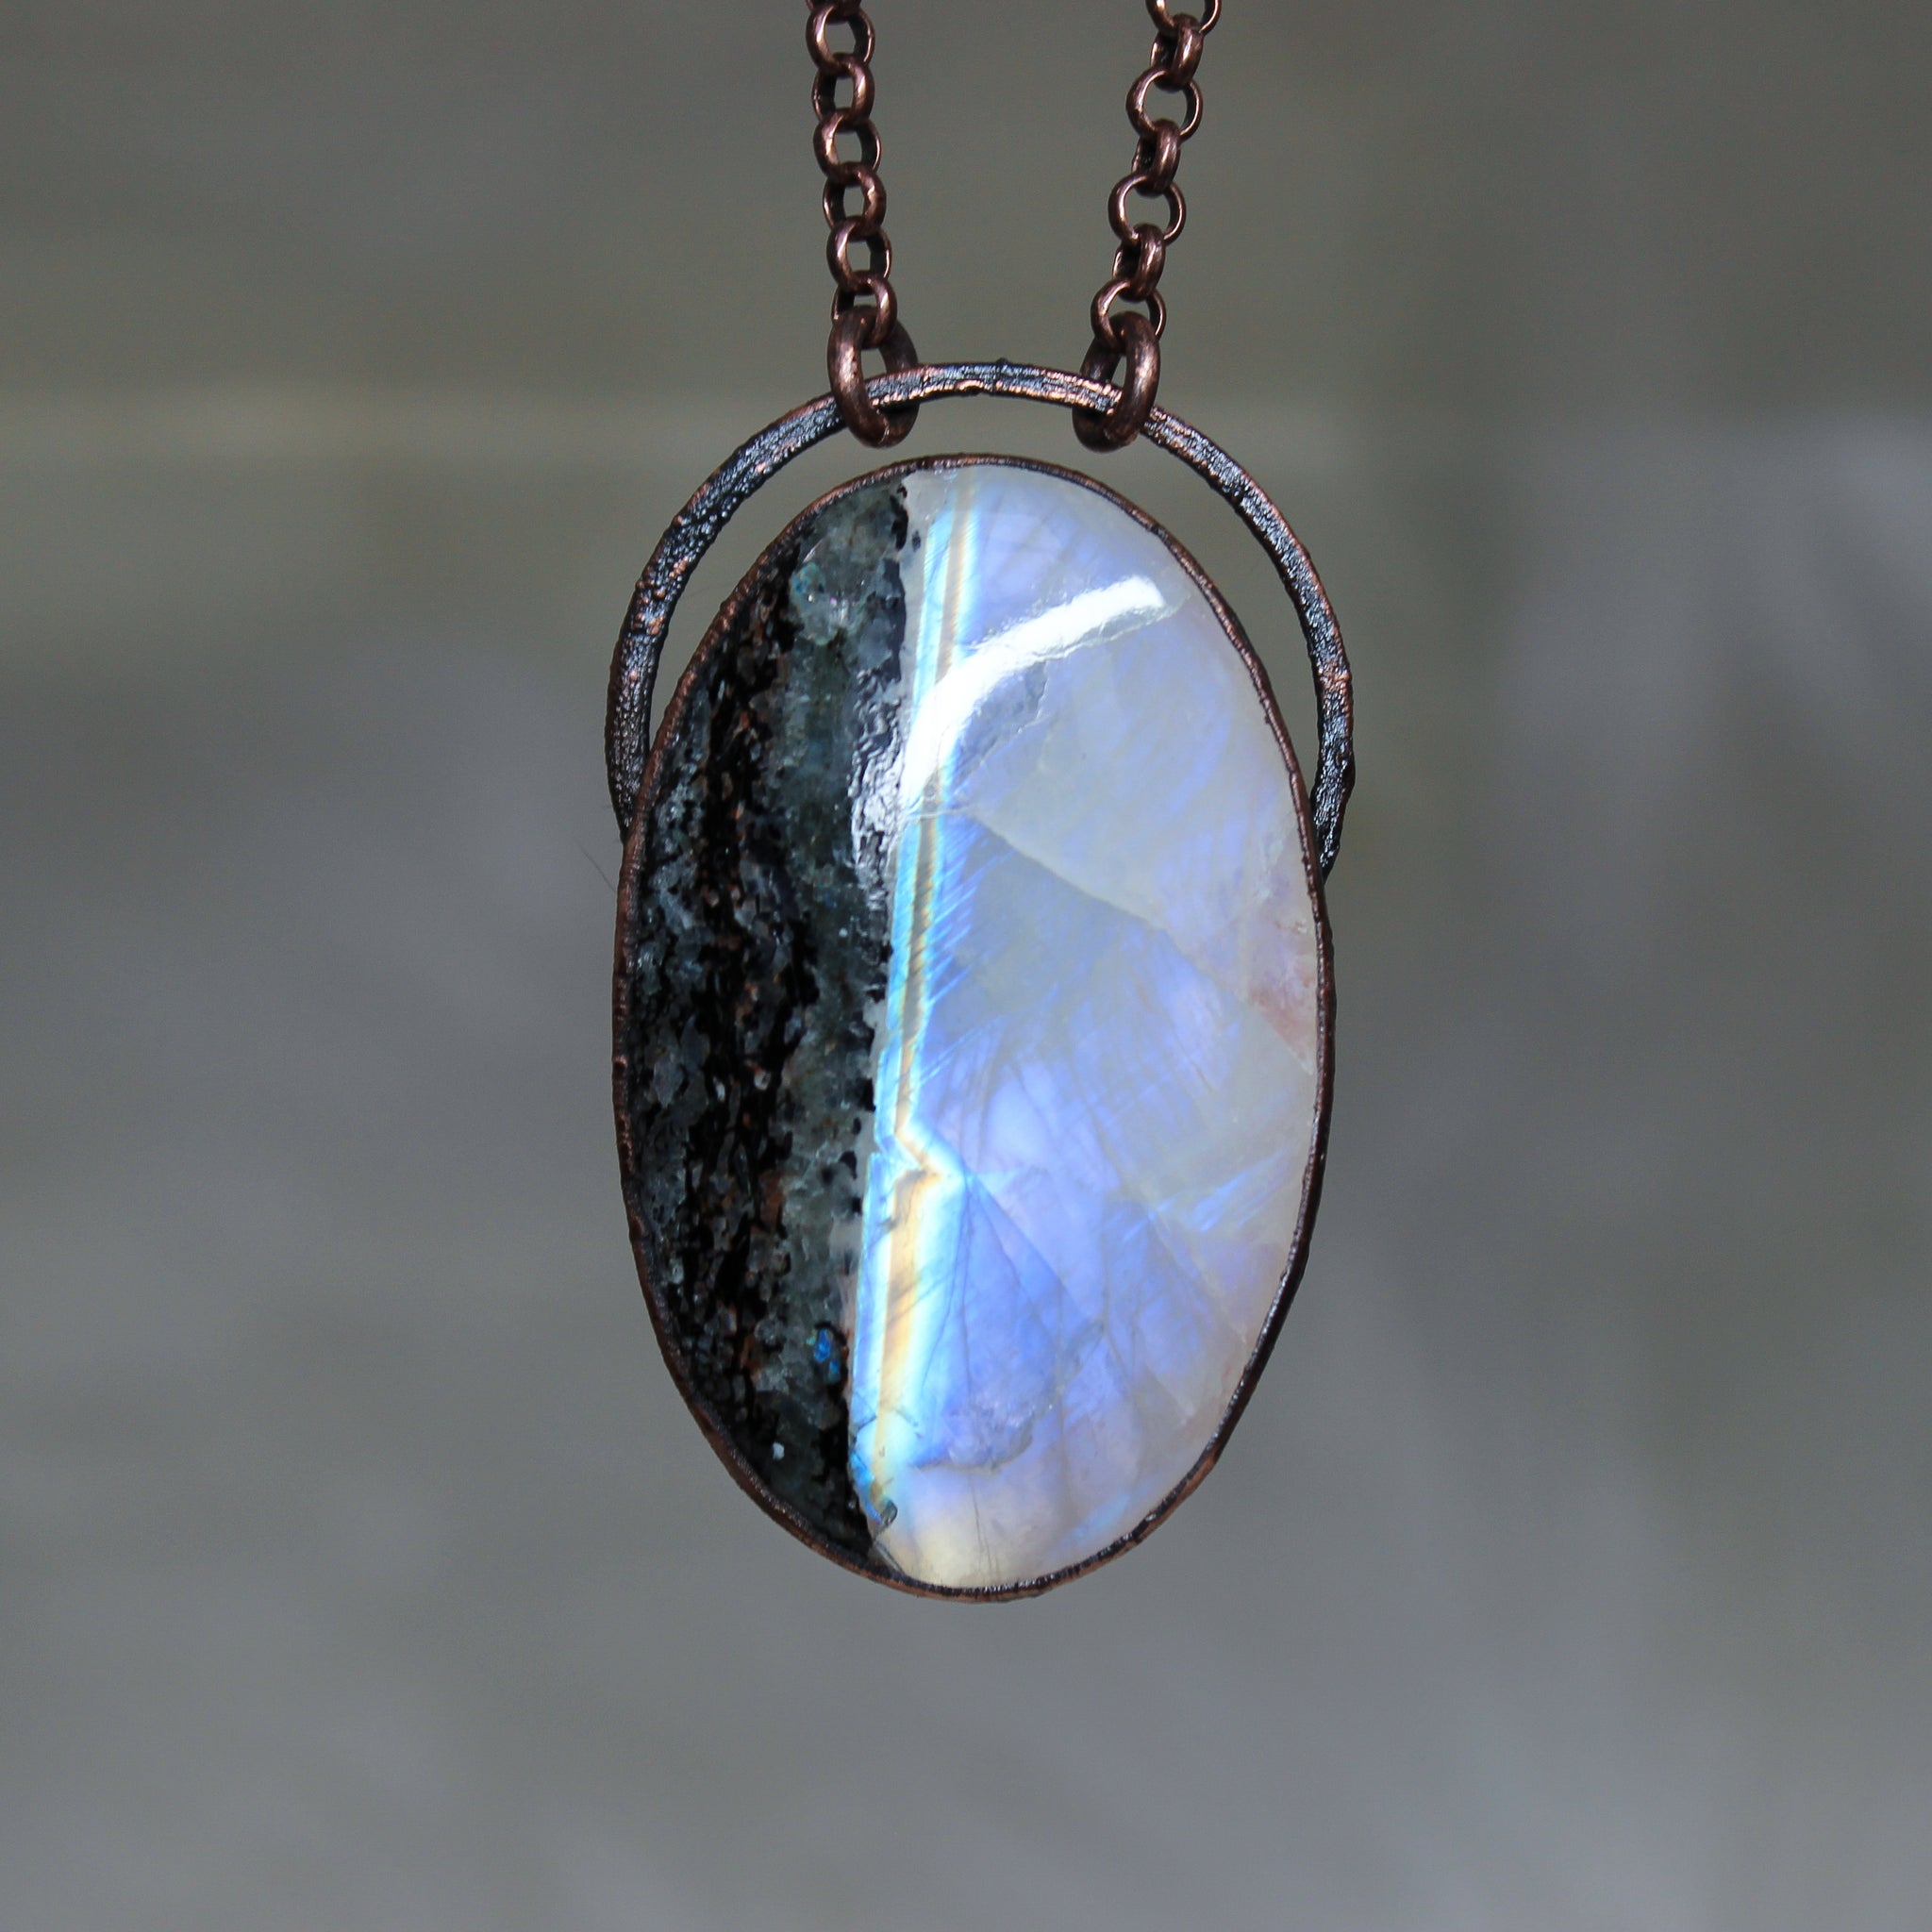 Moonstone Necklace with Tourmaline - b